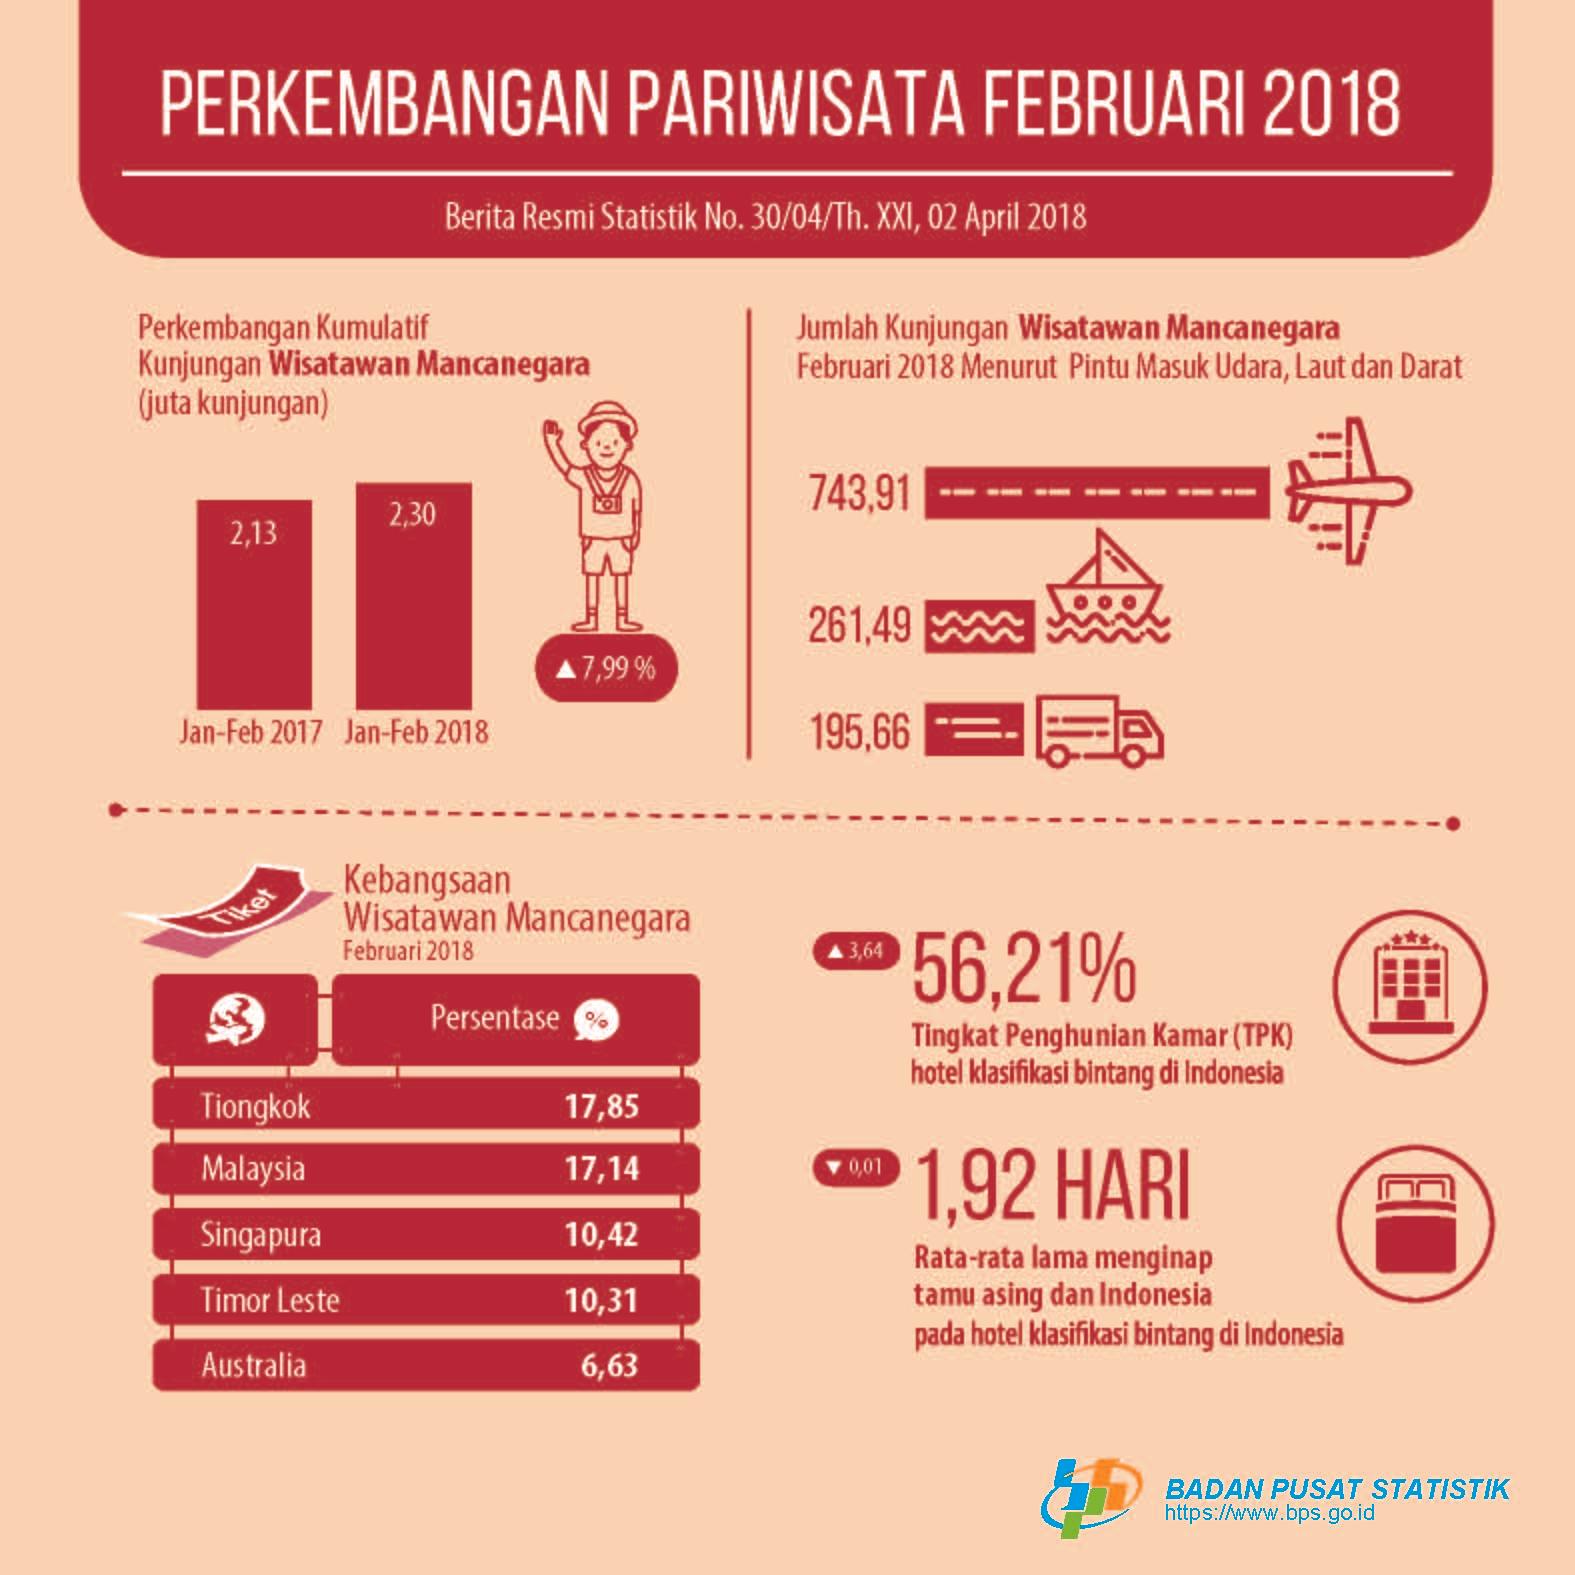 The number of foreign tourists visiting Indonesia in February 2018 reached 1.2 million visits.